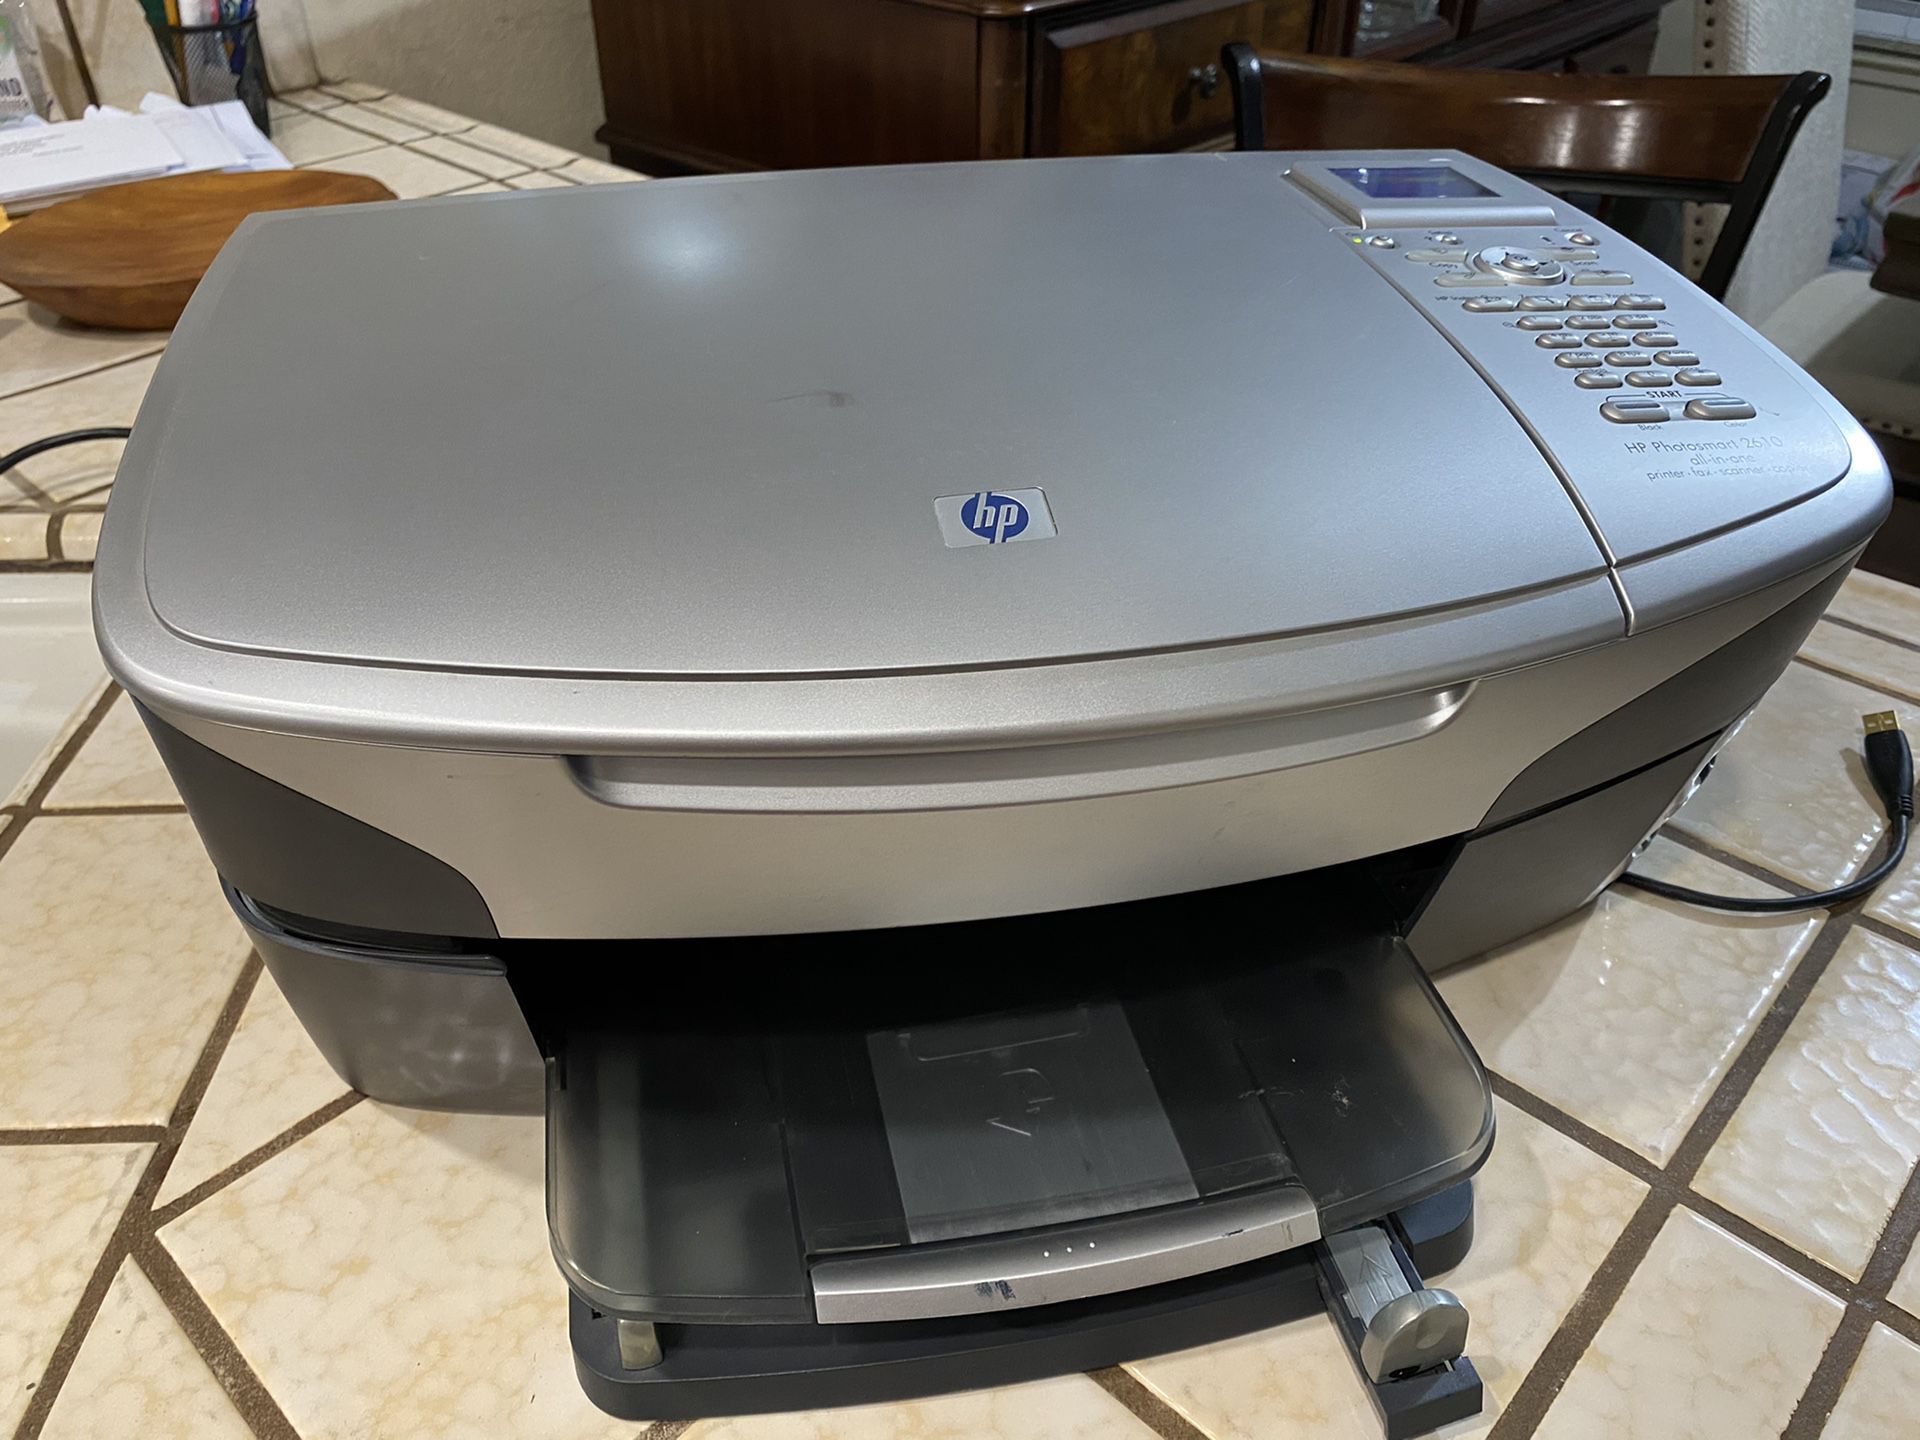 HP 2610 all in one printer, fax, scanner, and copier